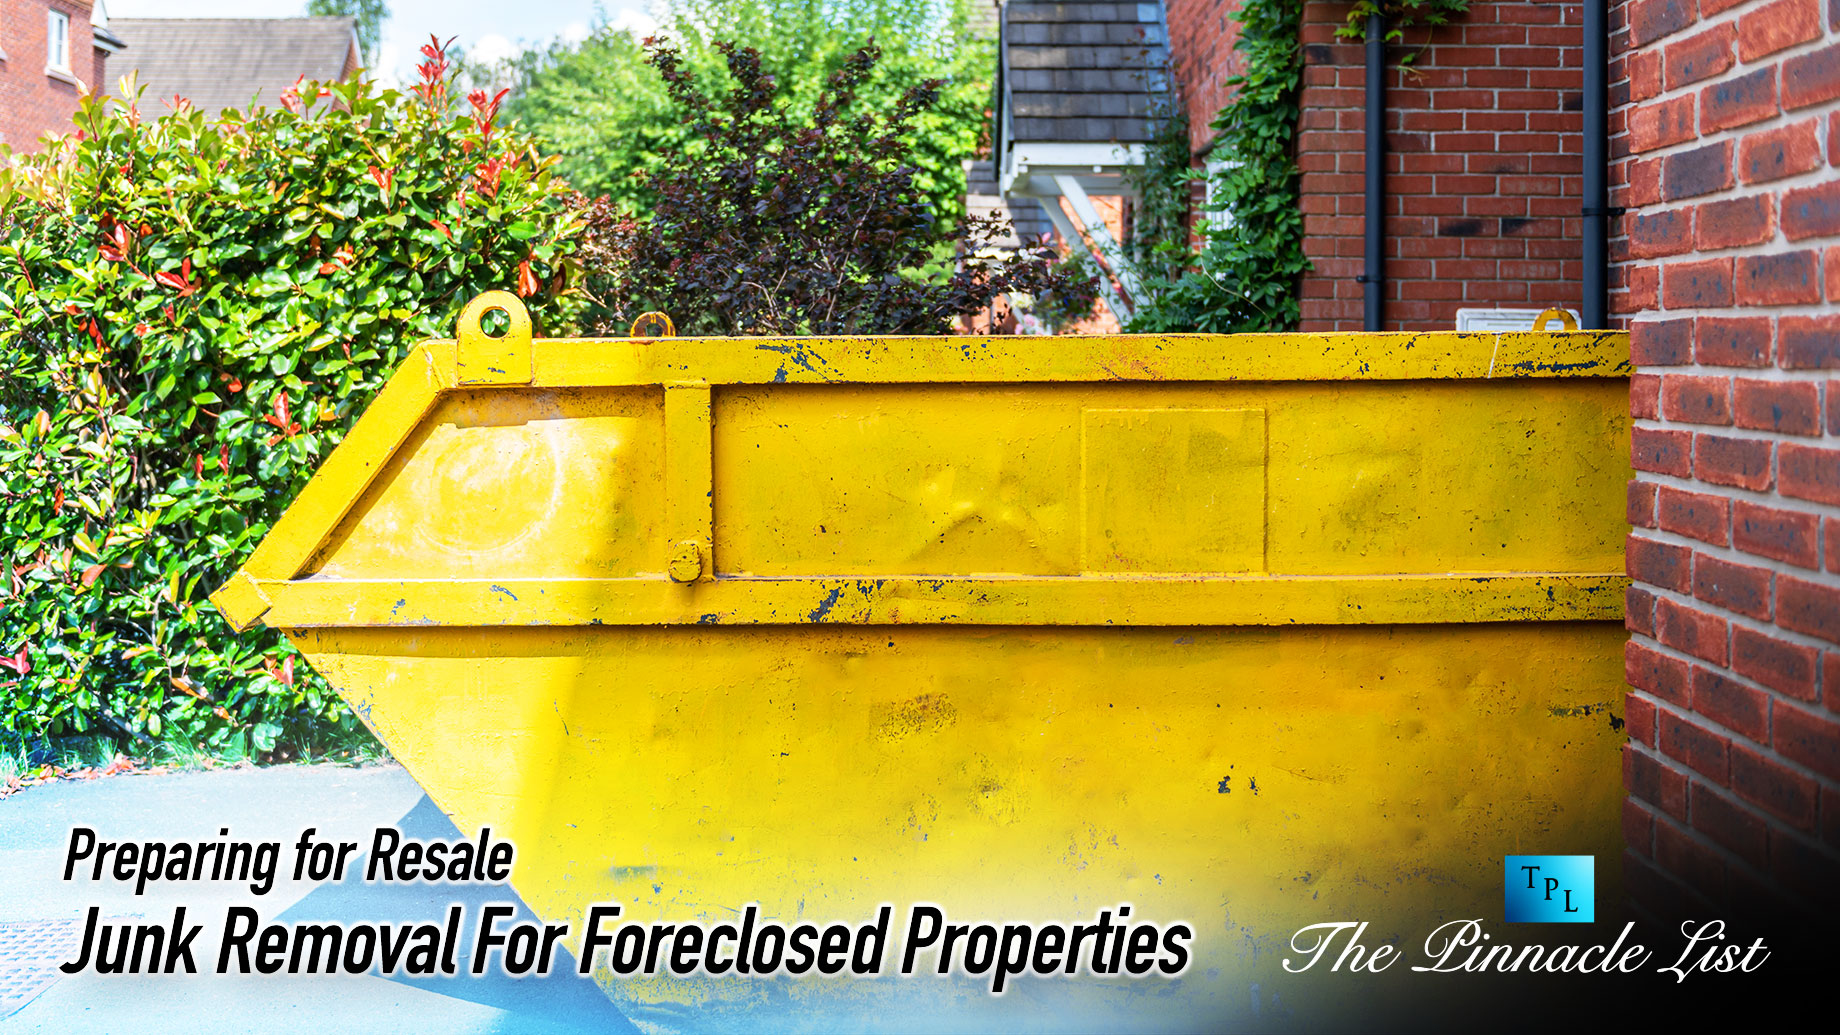 Preparing For Resale - Junk Removal For Foreclosed Properties